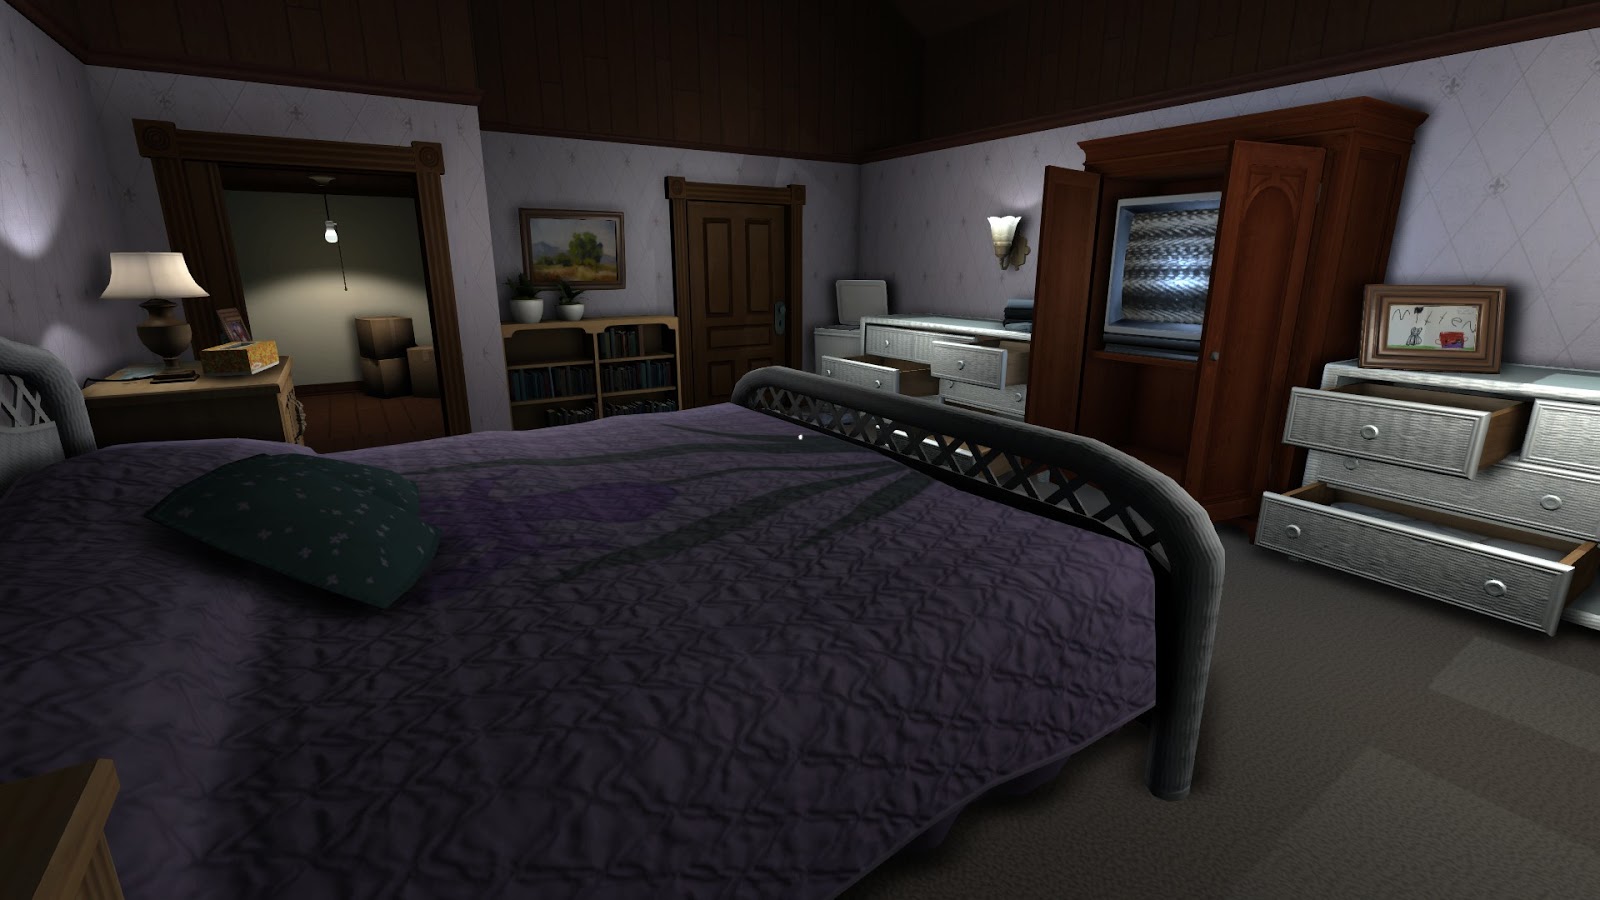 gone home free download pc